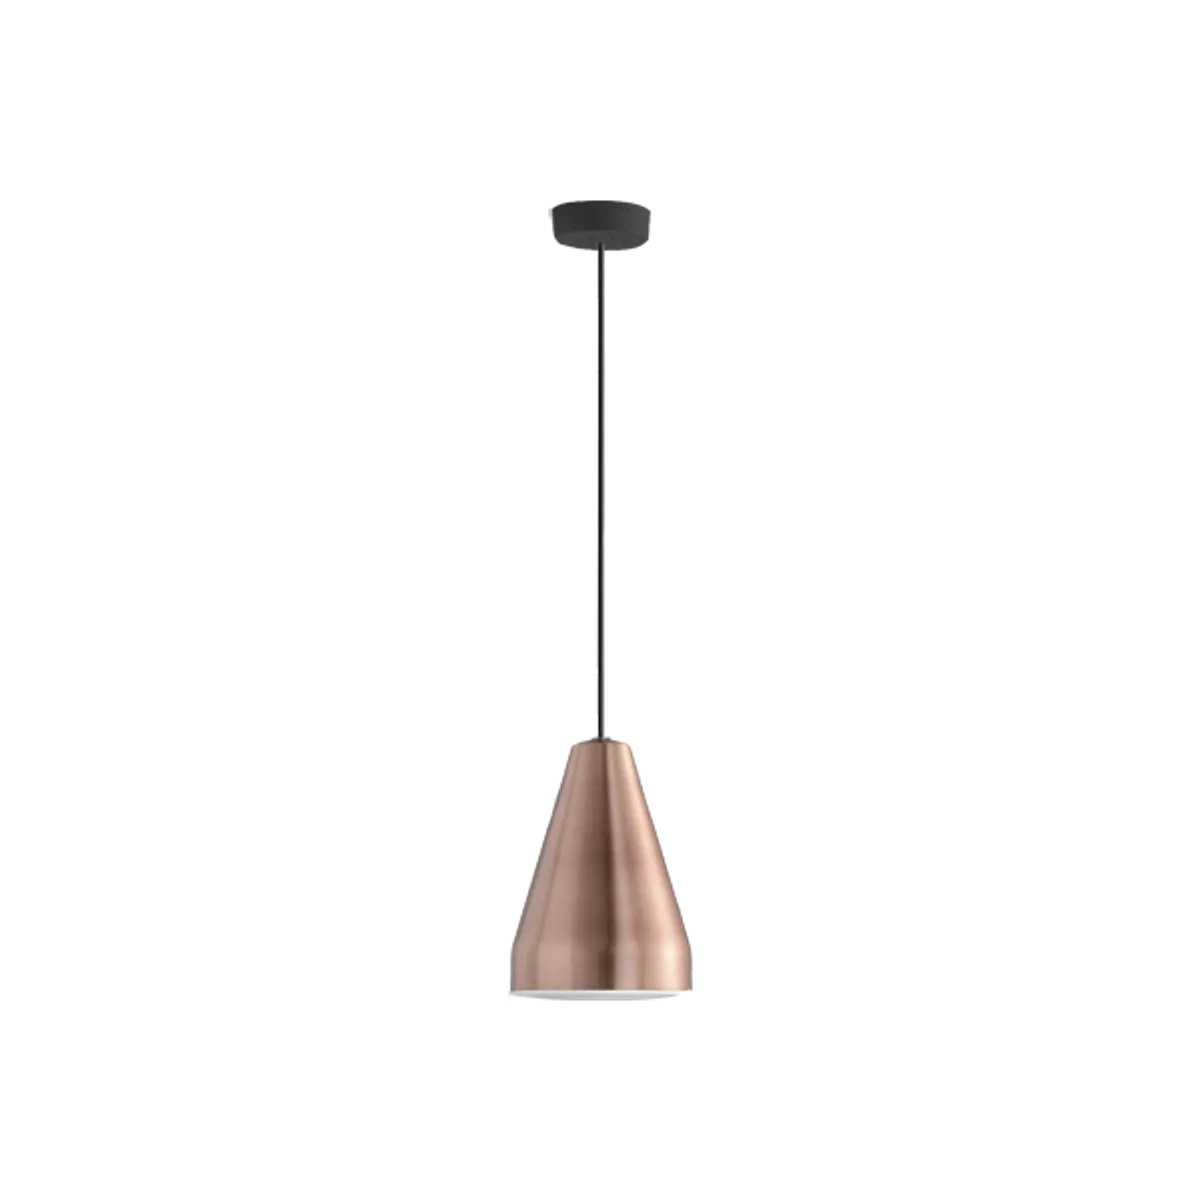 Tamara Pendant Lights Inside Out Contracts3